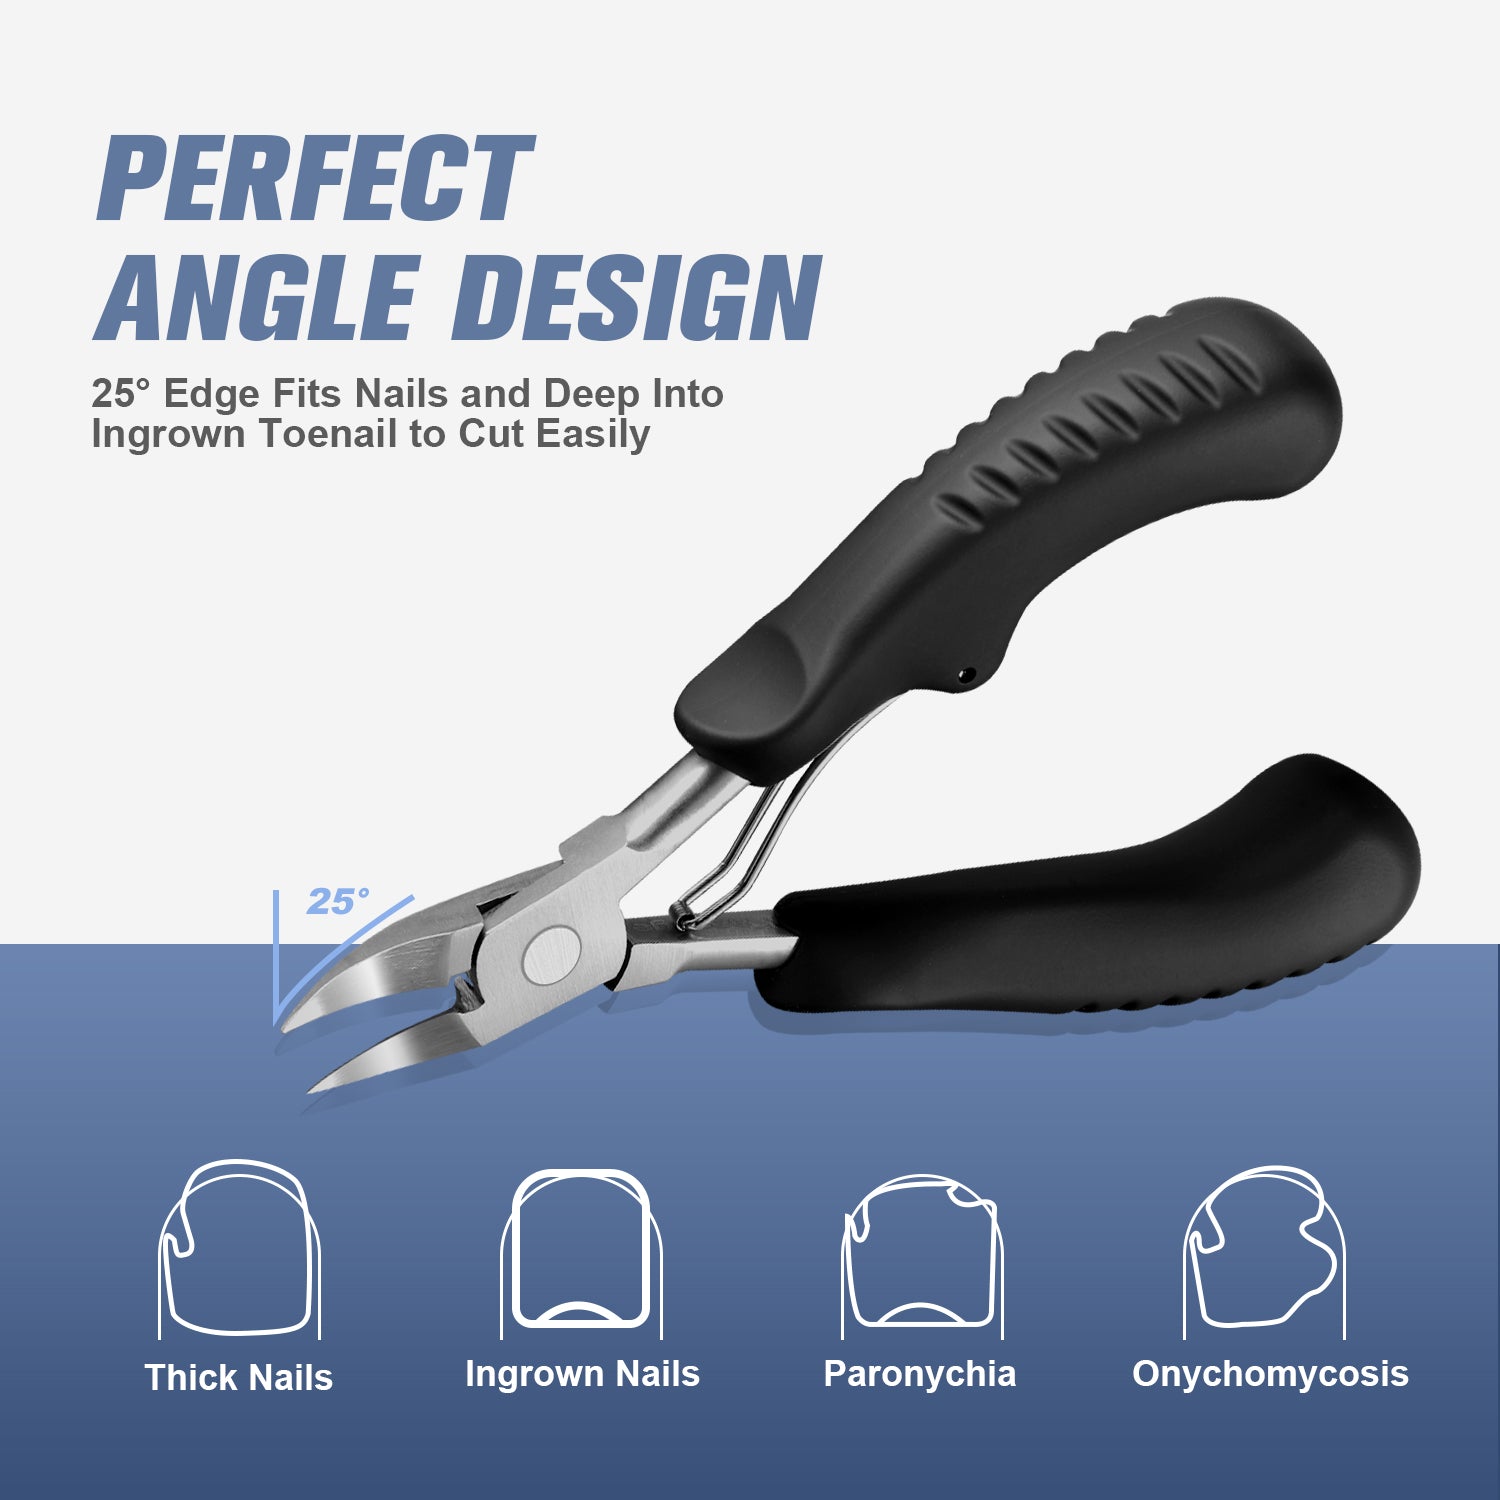 Toenail Clippers for Elderly Used For Thick Toenails Fungi Ingrown Toenails